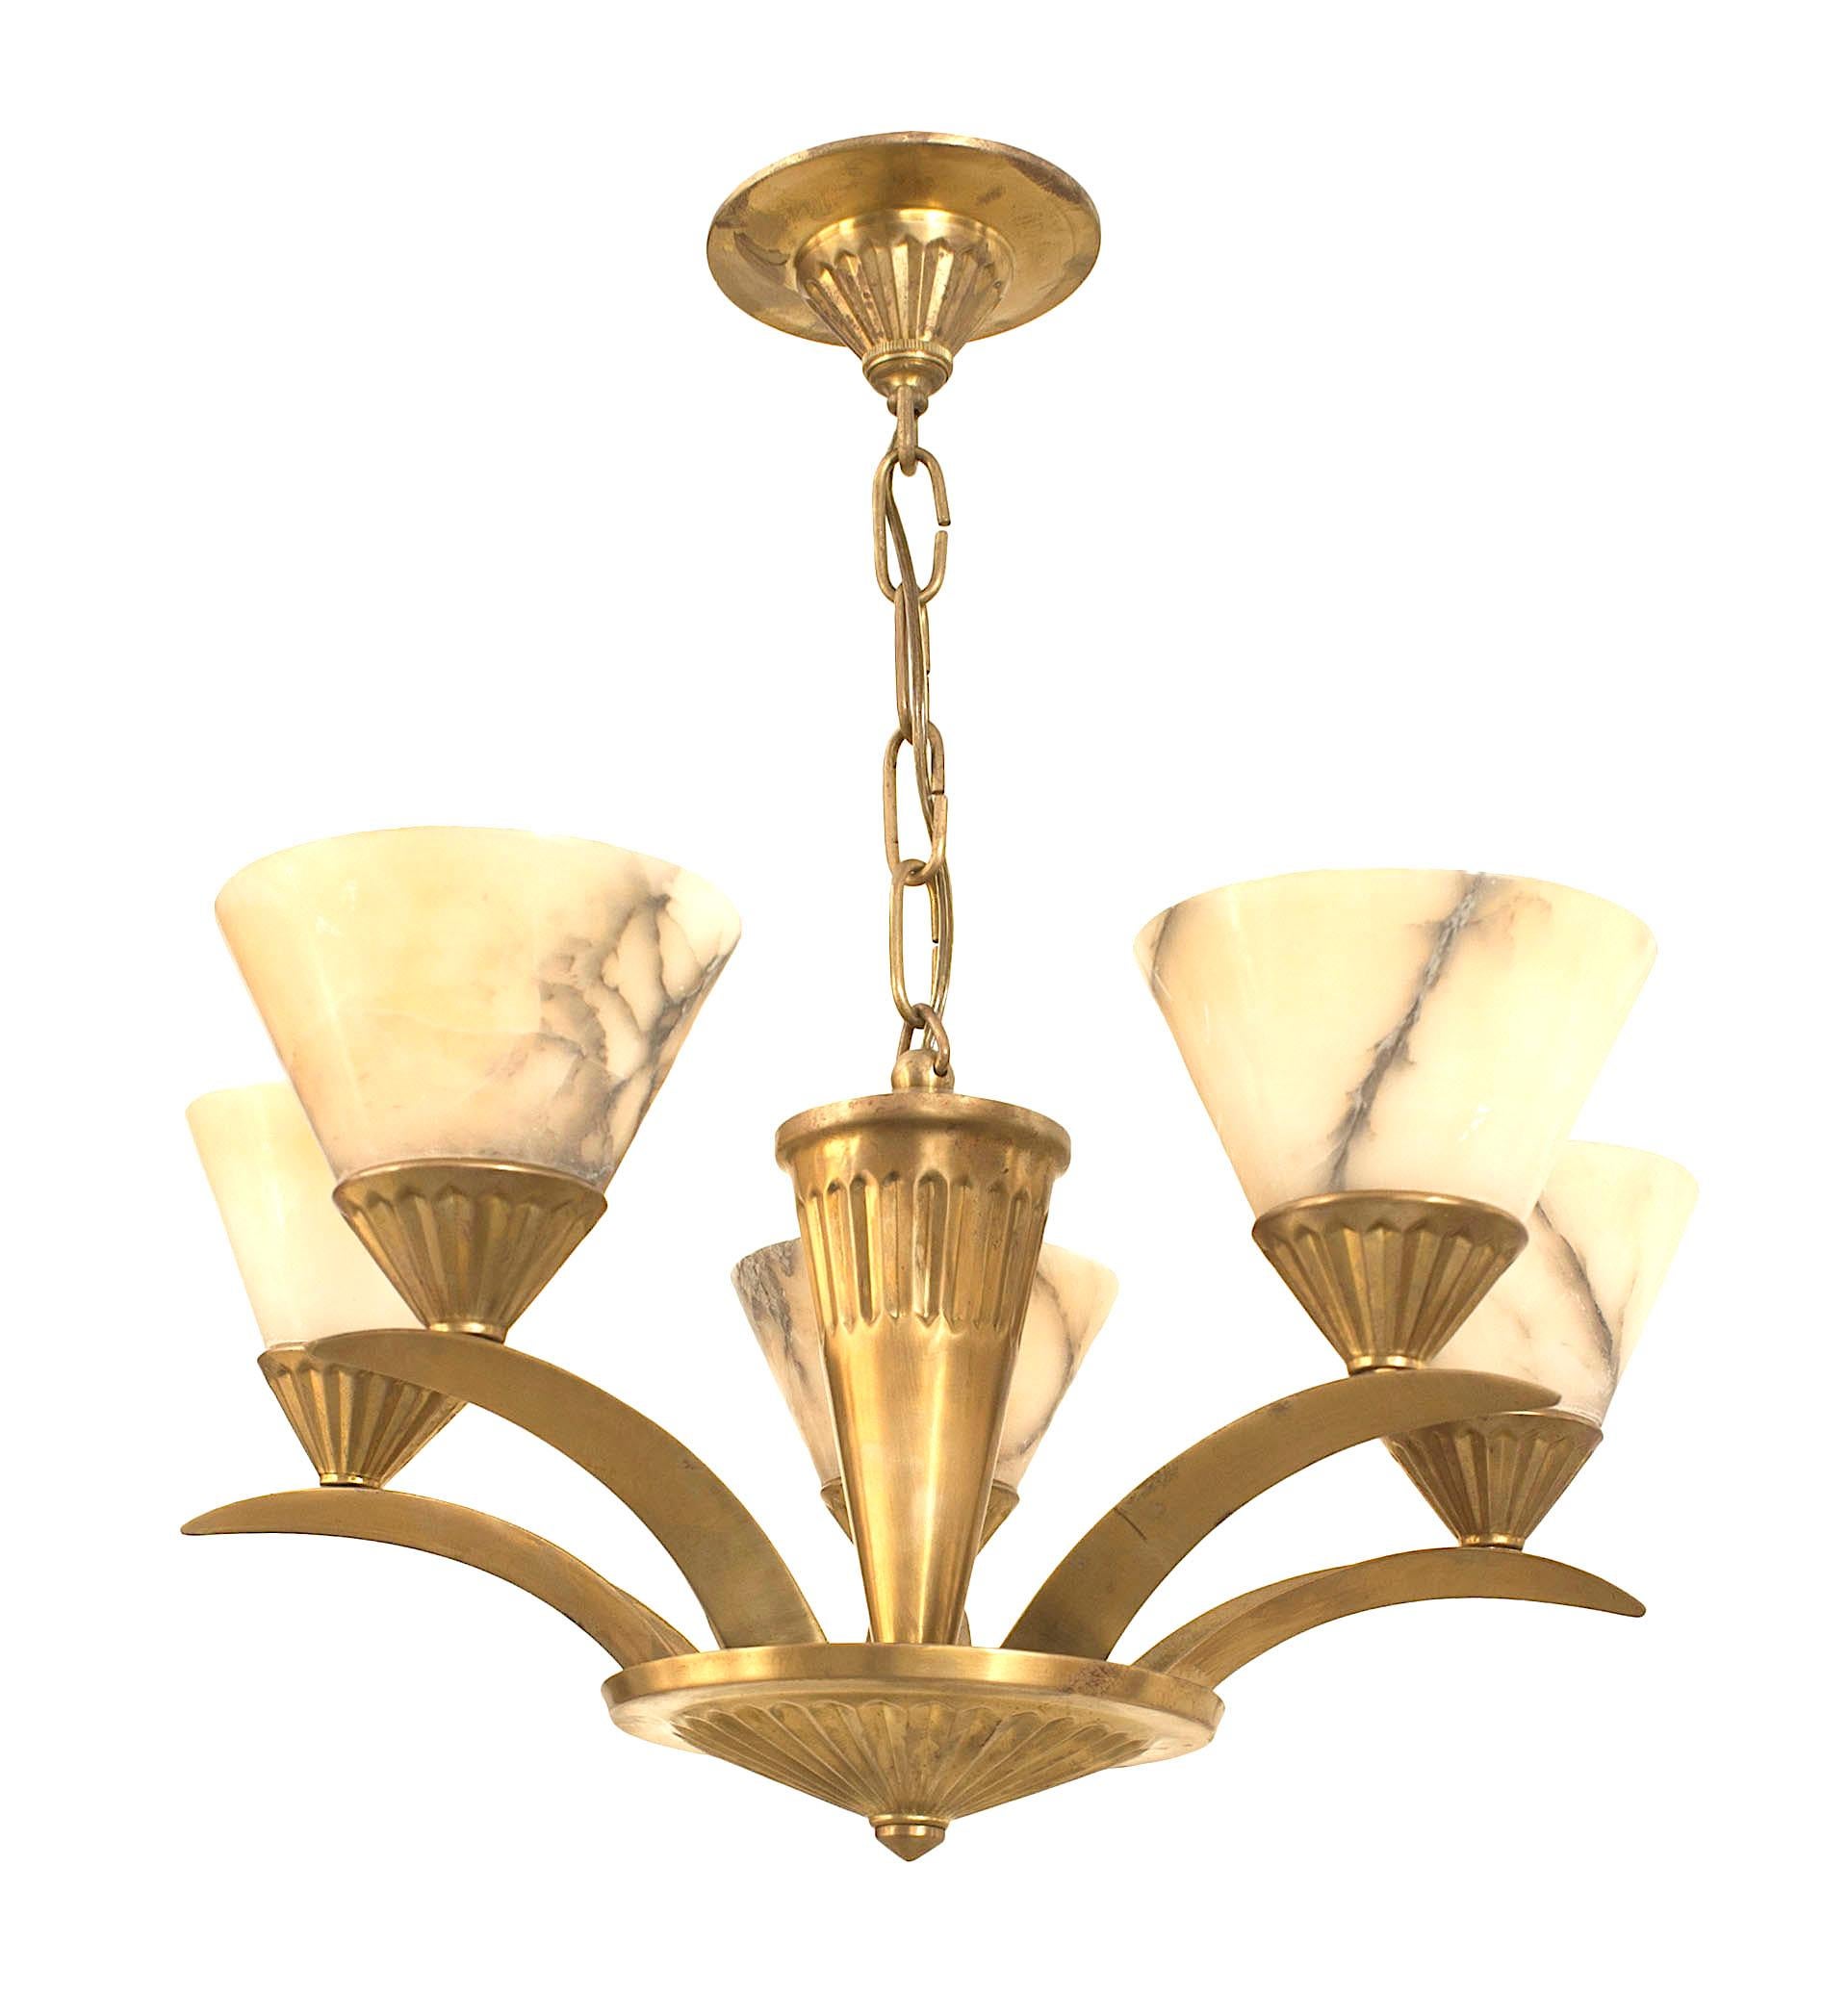 French Art Deco brass (circa 1925) chandelier with 5 flaired arms emanating from a cone form center and supporting conical shaped alabaster shades.

